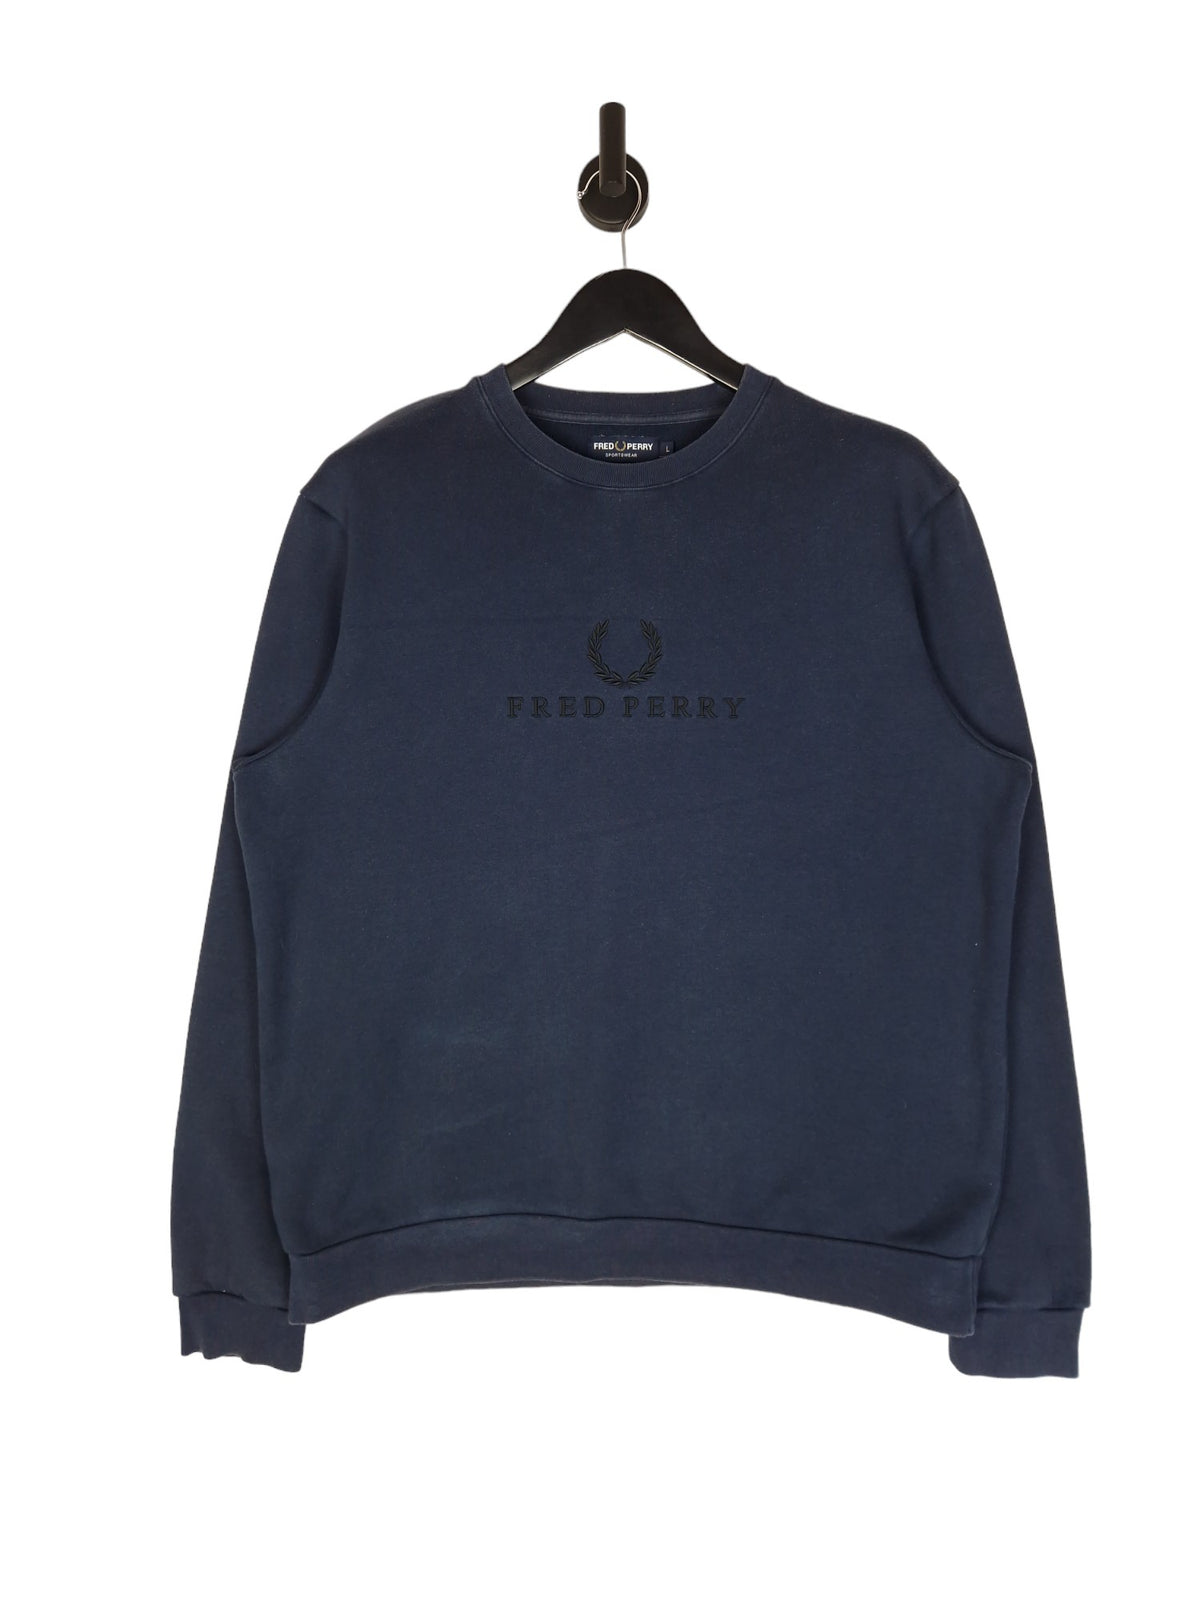 Fred Perry Spell Out Sweatshirt - Size Large